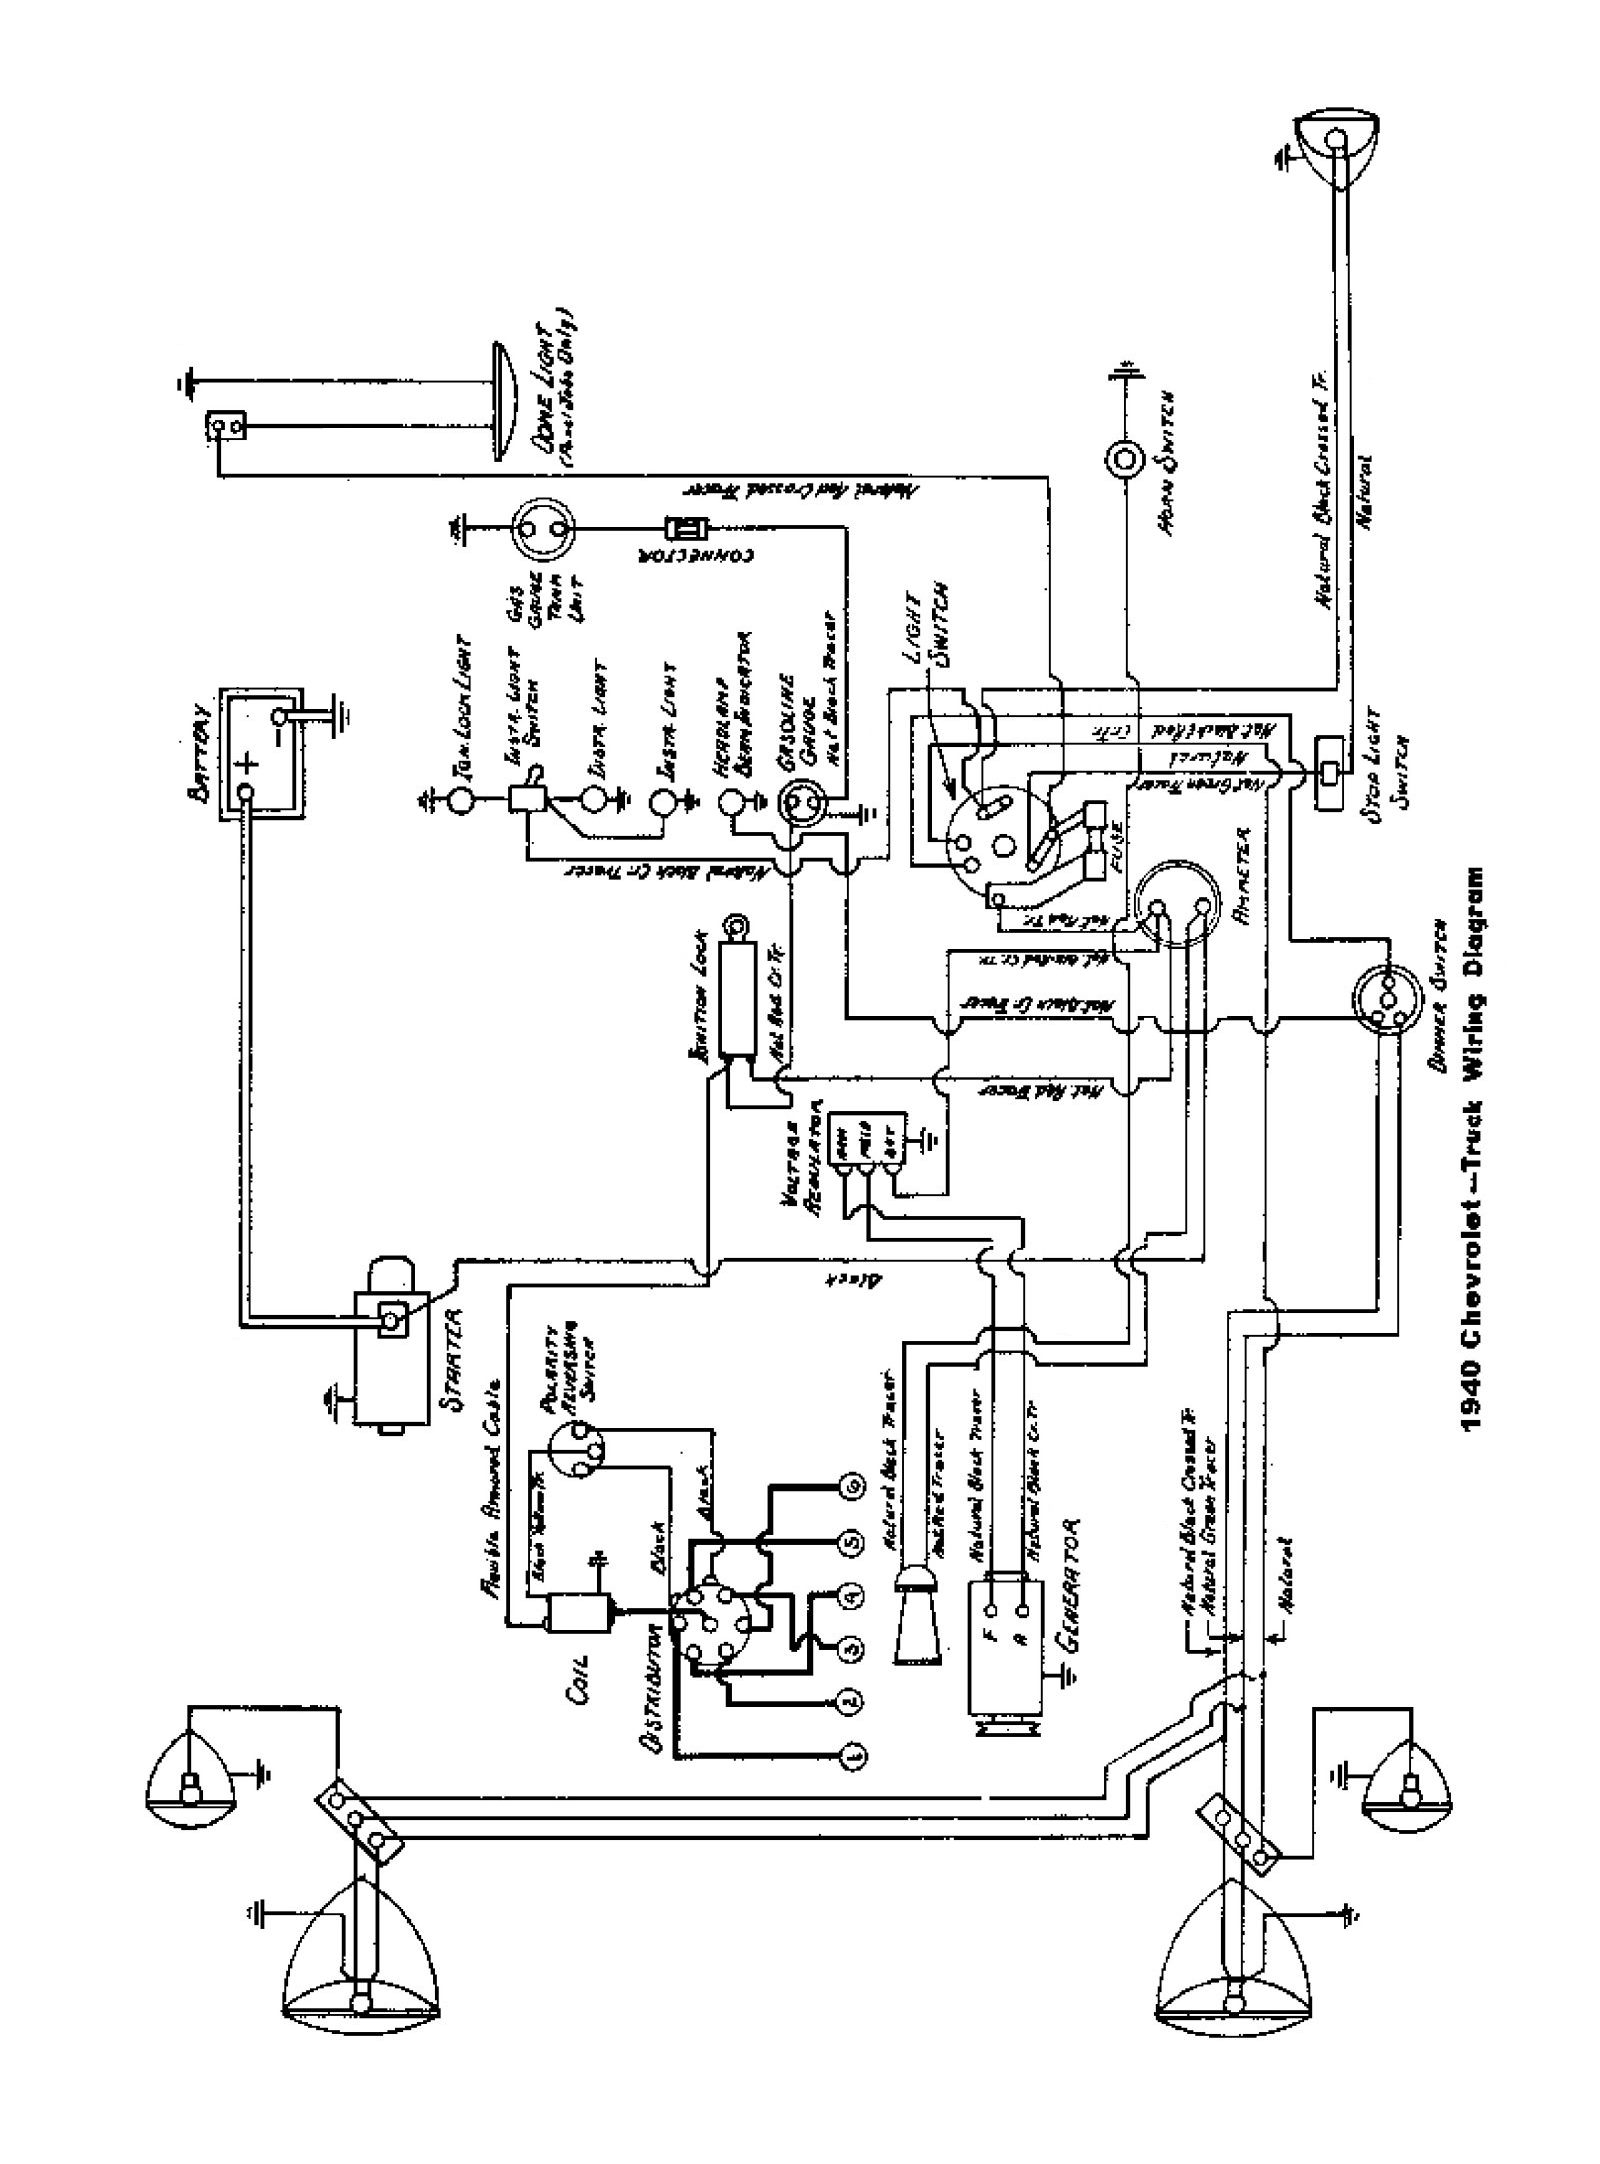 Chevy Wiring Diagrams, Gm Truck Wiring Diagrams